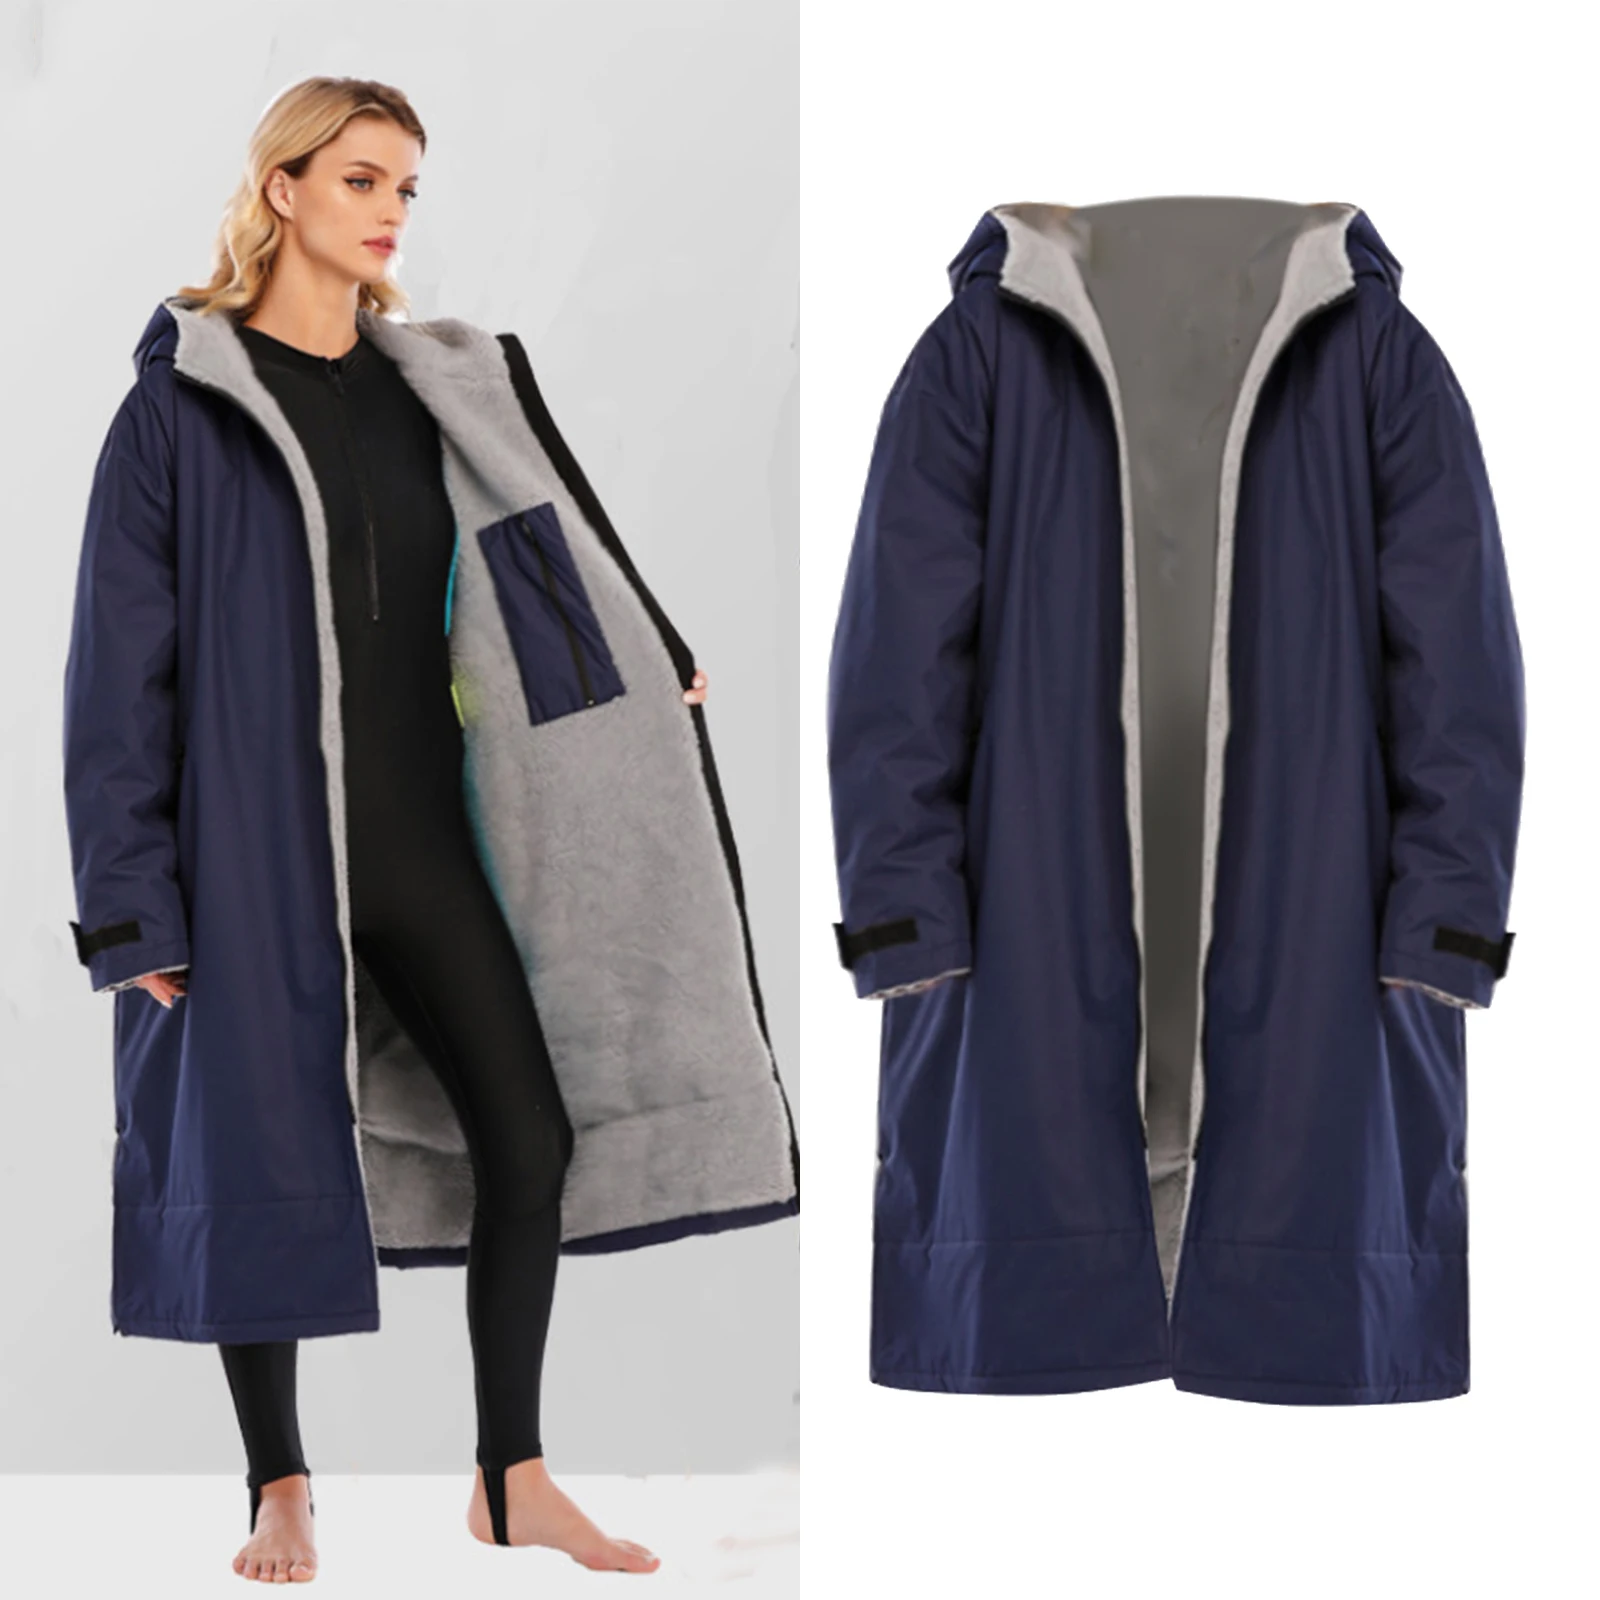 

Neutral Parka Jackets with Hooded Hot Winter Waterproof Surf Changing Robe Jacket Hooded Cloak Coat Surfing Pool Lining Raincoat